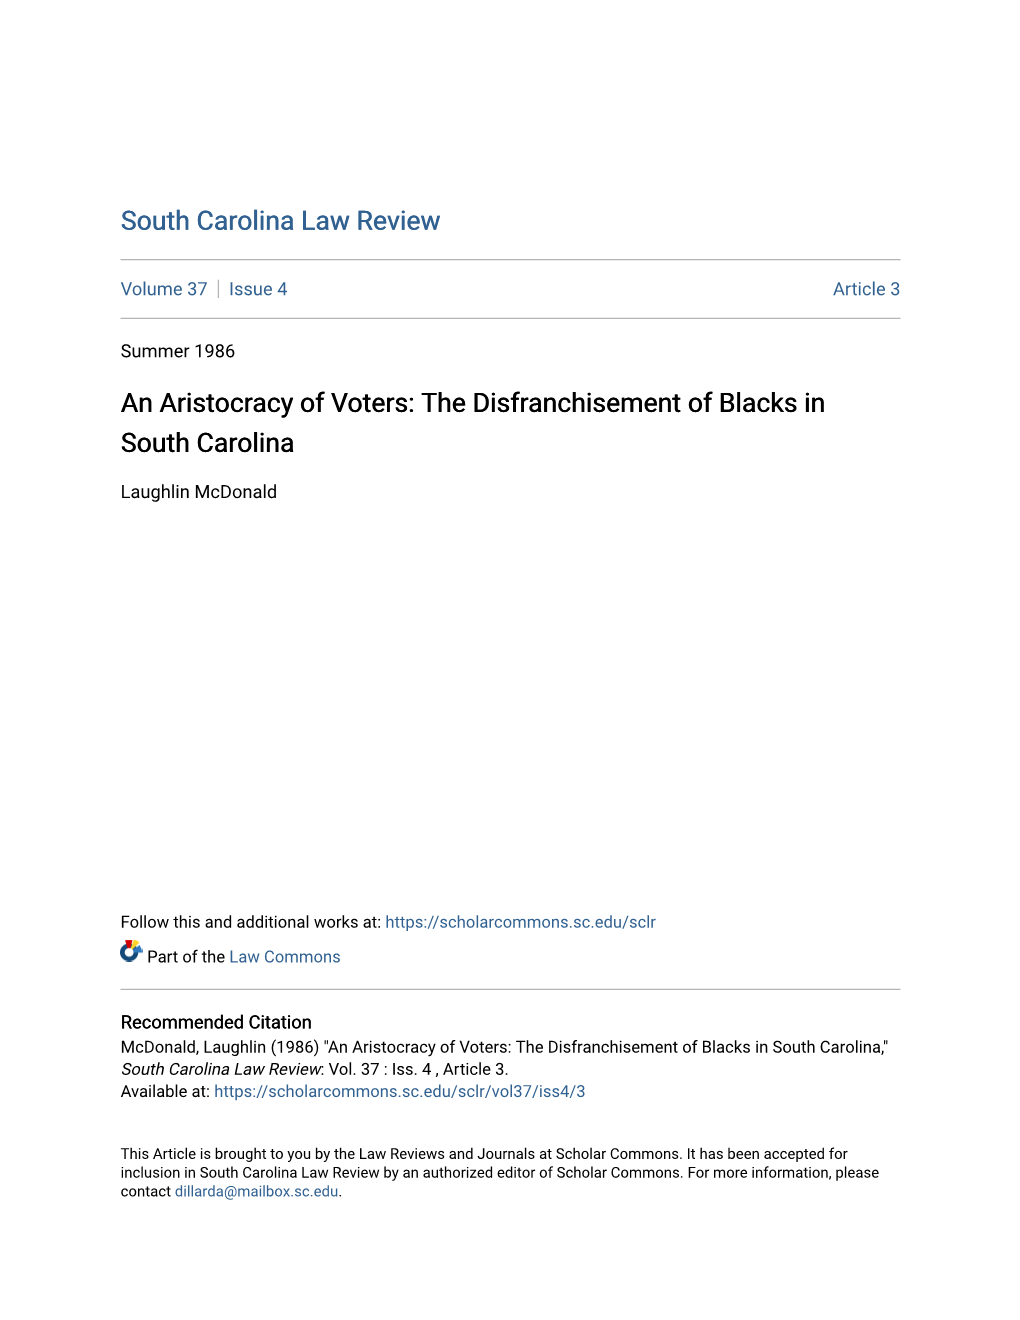 An Aristocracy of Voters: the Disfranchisement of Blacks in South Carolina